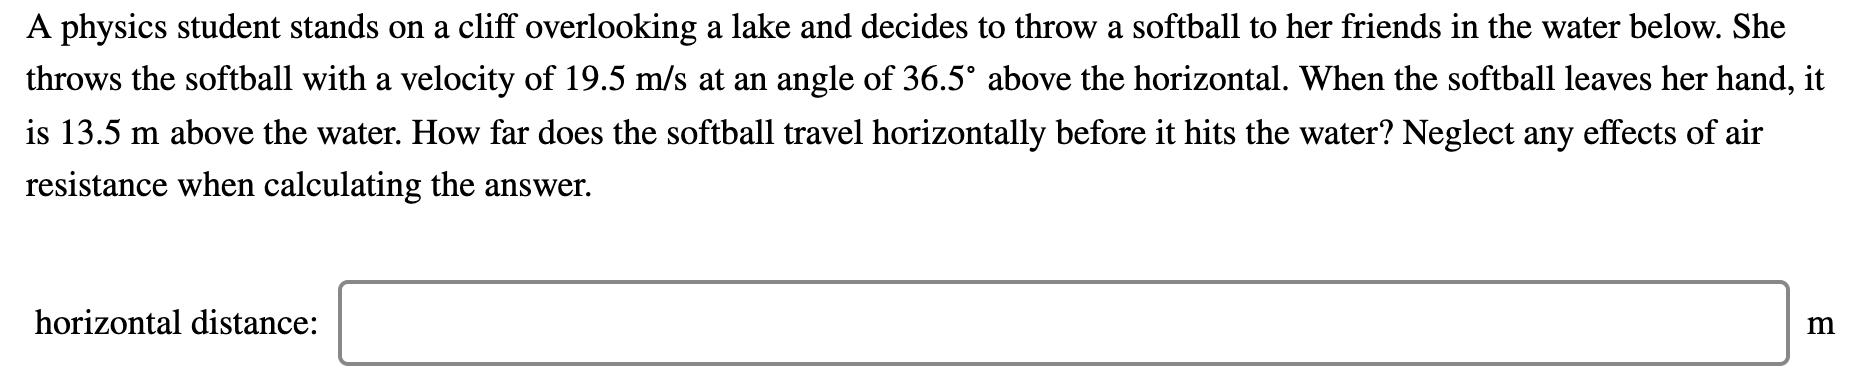 A physics student stands on a cliff overlooking a lake and decides to throw a softball to her friends in the water below. She
throws the softball with a velocity of 19.5 m/s at an angle of 36.5° above the horizontal. When the softball leaves her hand, it
is 13.5 m above the water. How far does the softball travel horizontally before it hits the water? Neglect any effects of air
resistance when calculating the answer.
